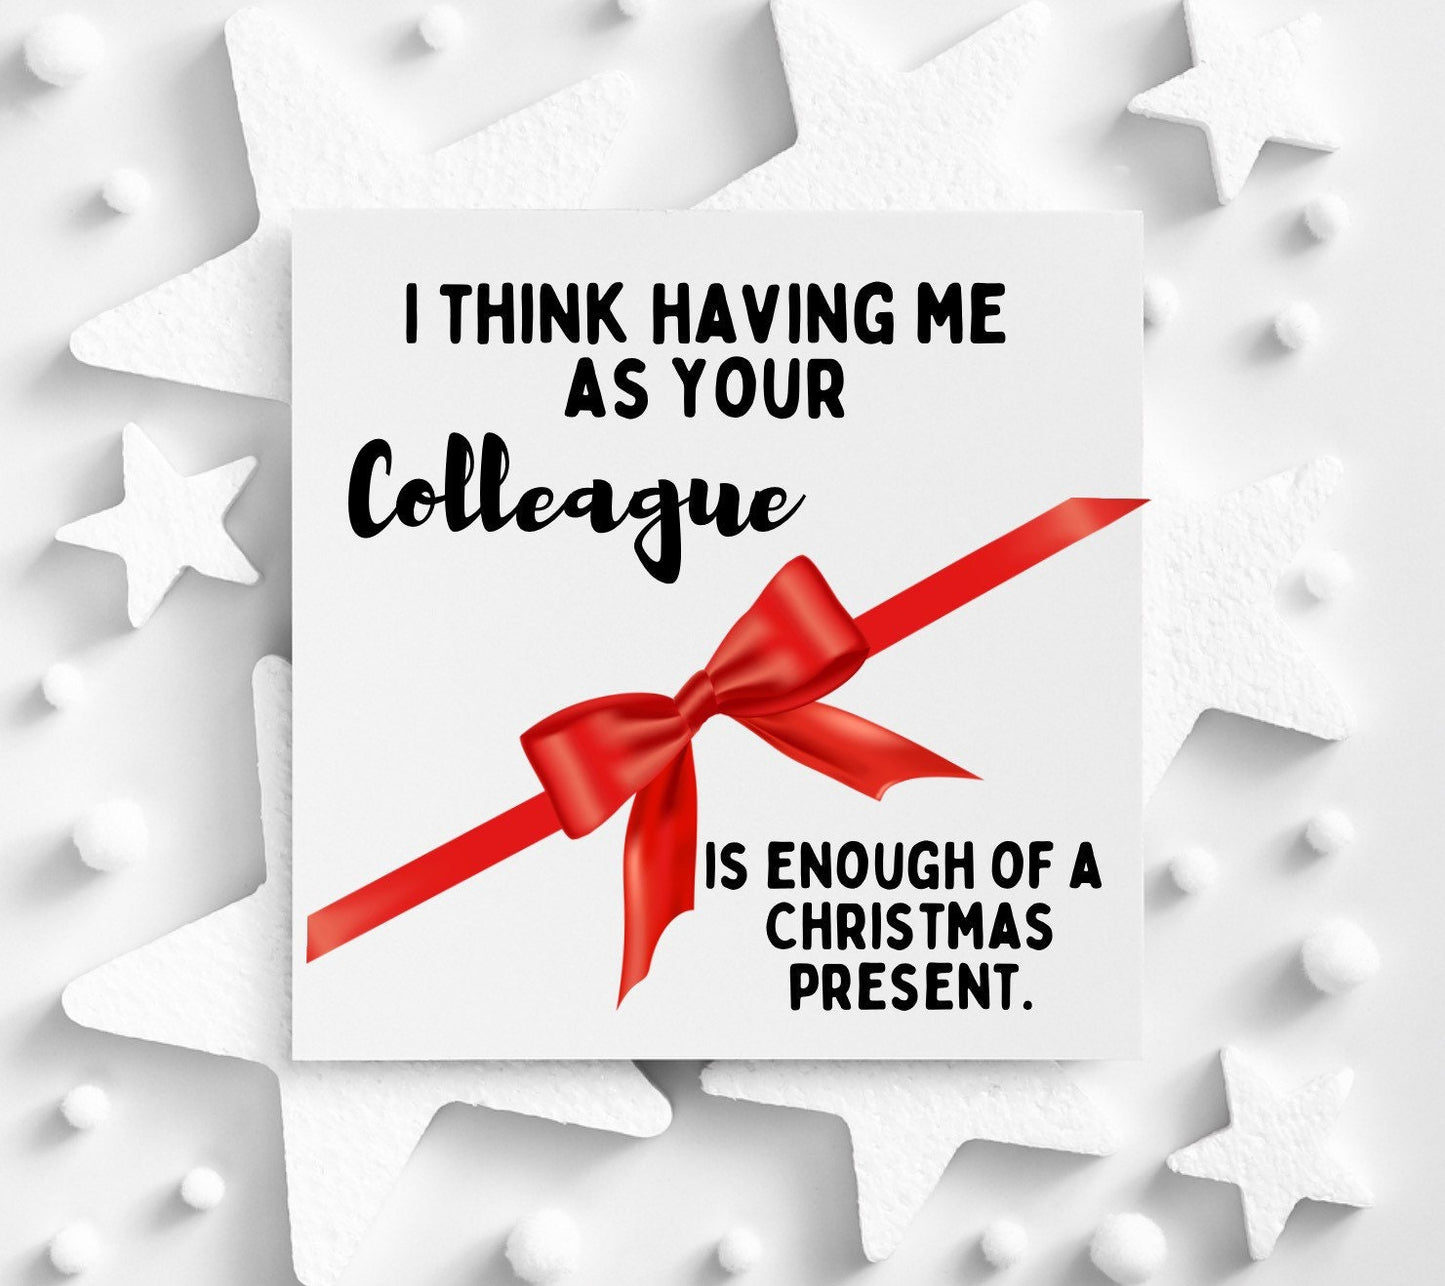 Funny Christmas card for colleague, I think I am enough of a Christmas gift, no present for Xmas card